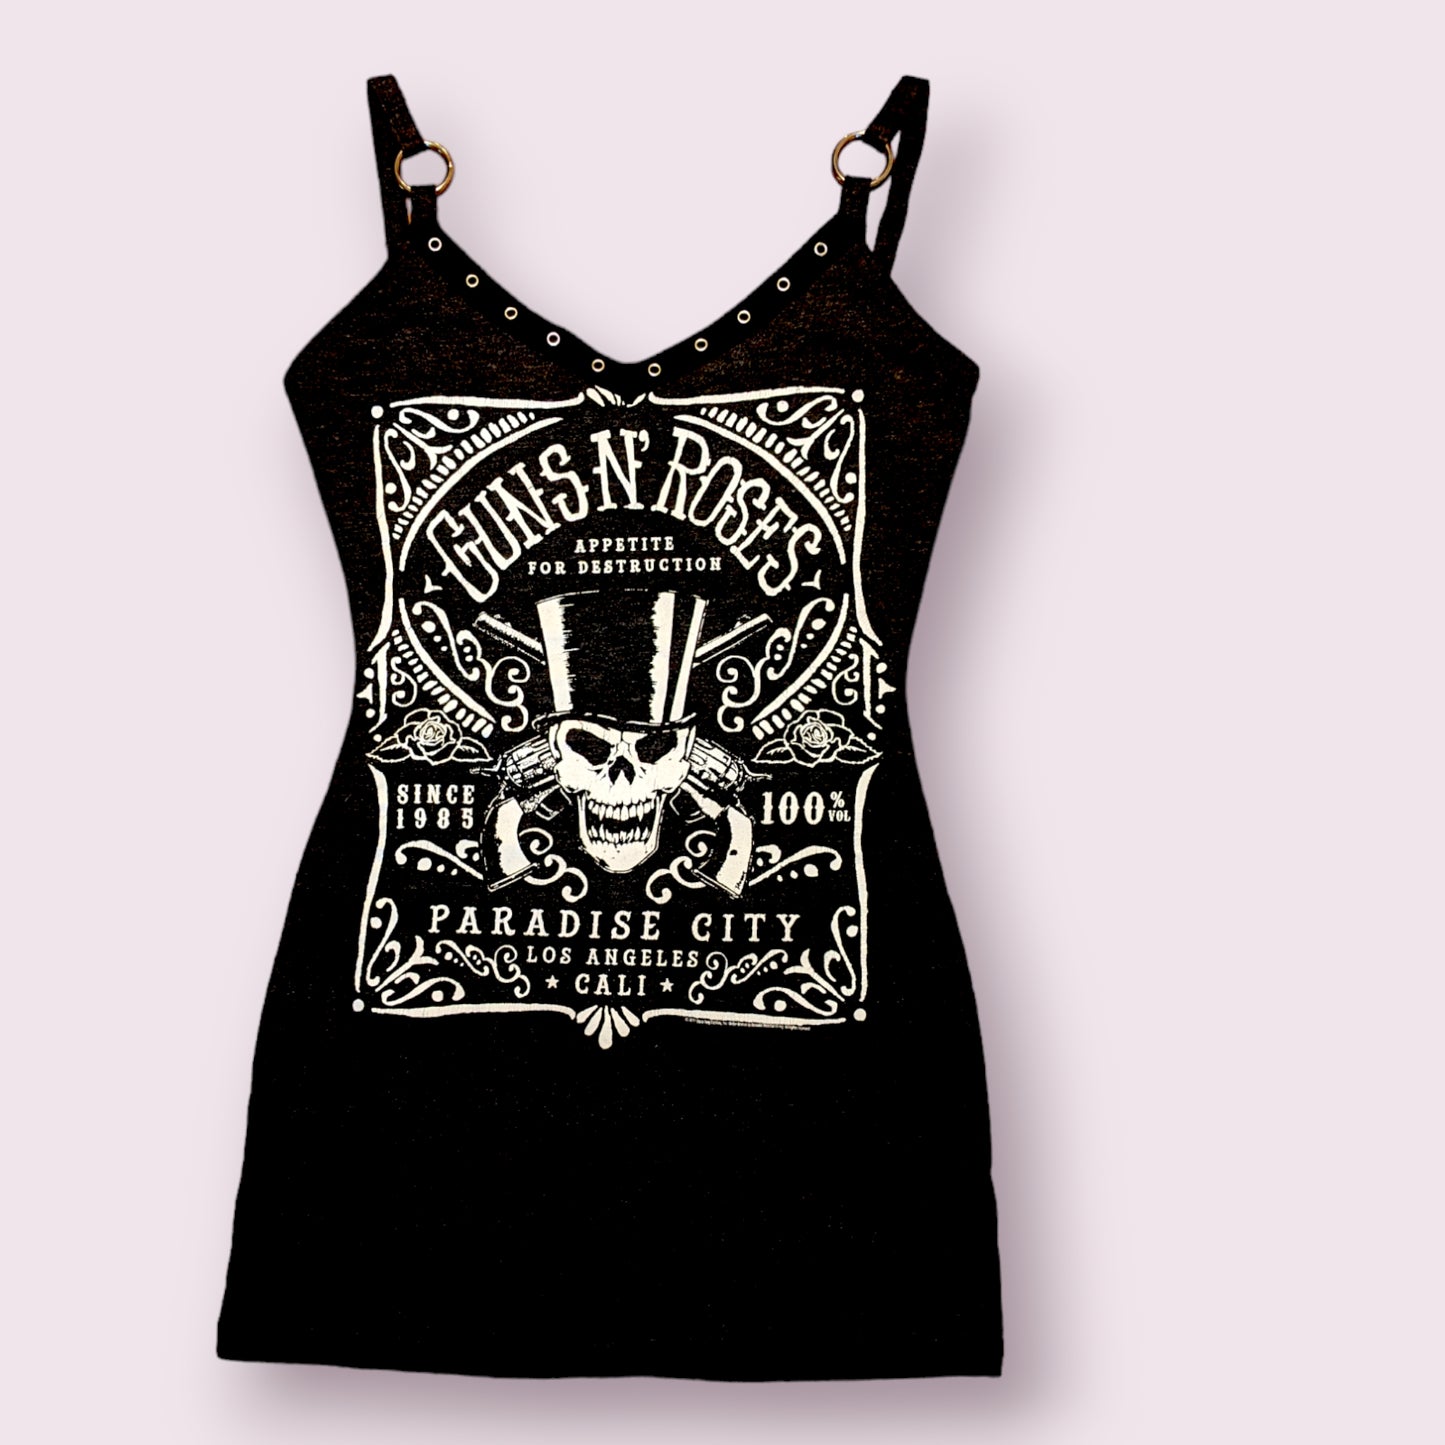 Guns N Roses - Paradise City strappy dress with O-rings